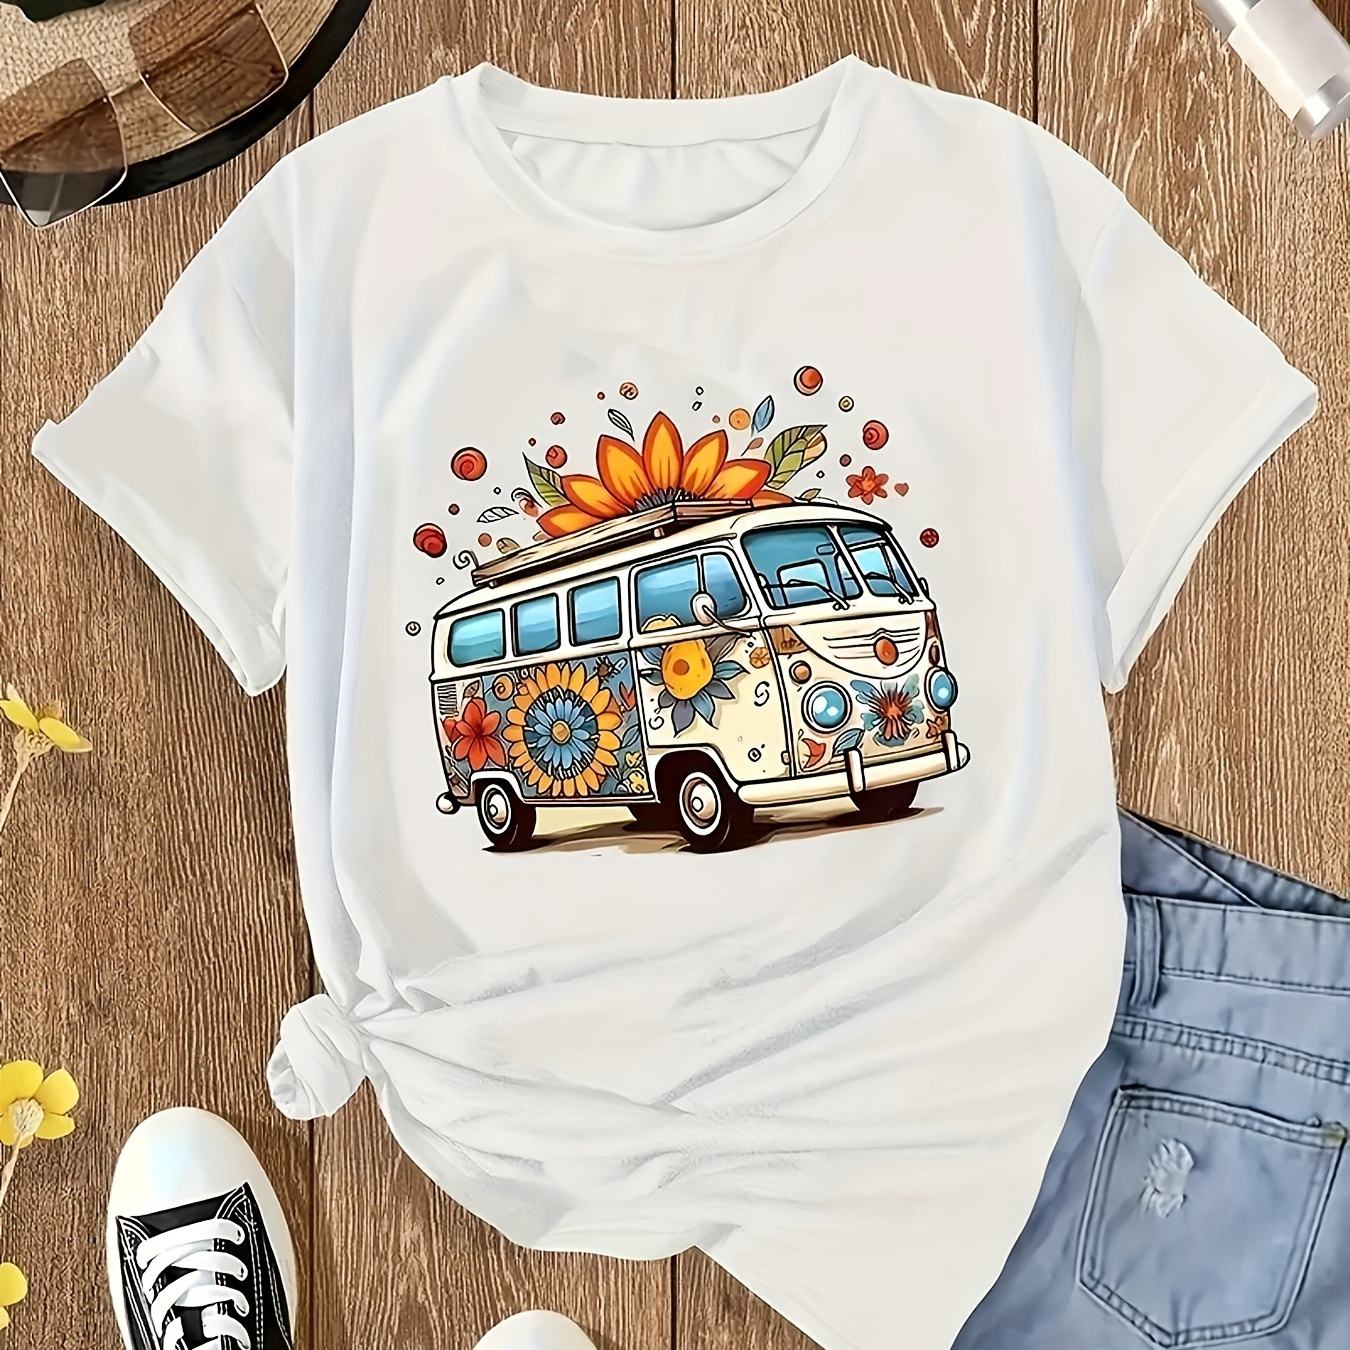 

Bus & Floral Print T-shirt, Short Sleeve Crew Neck Casual Top For Summer & Spring, Women's Clothing